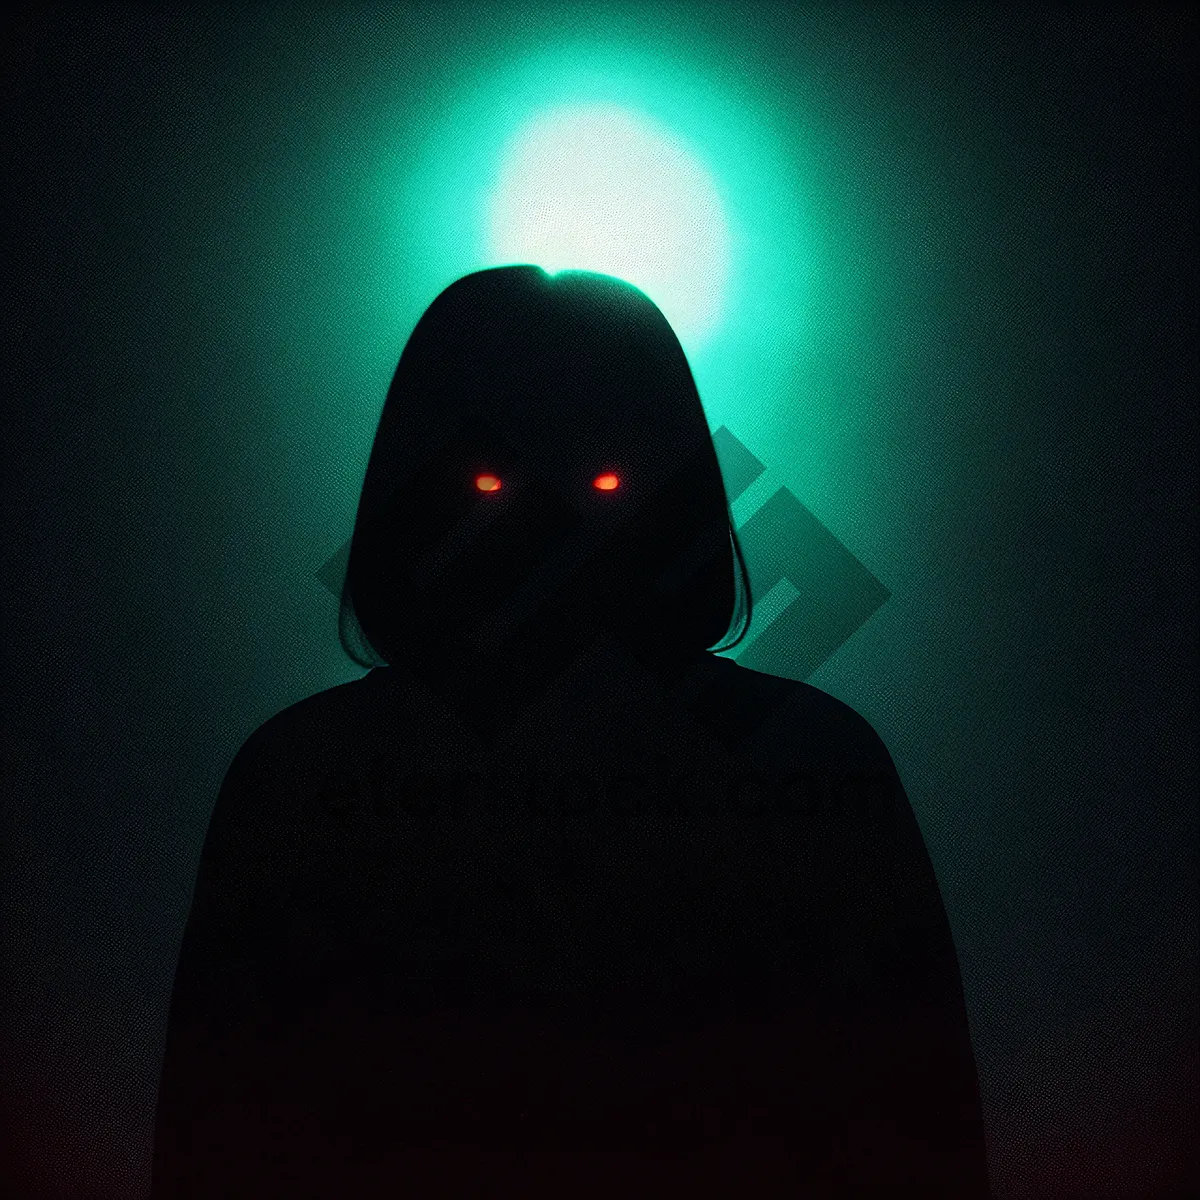 Picture of Dark Silhouette of a Masked Man in Robe